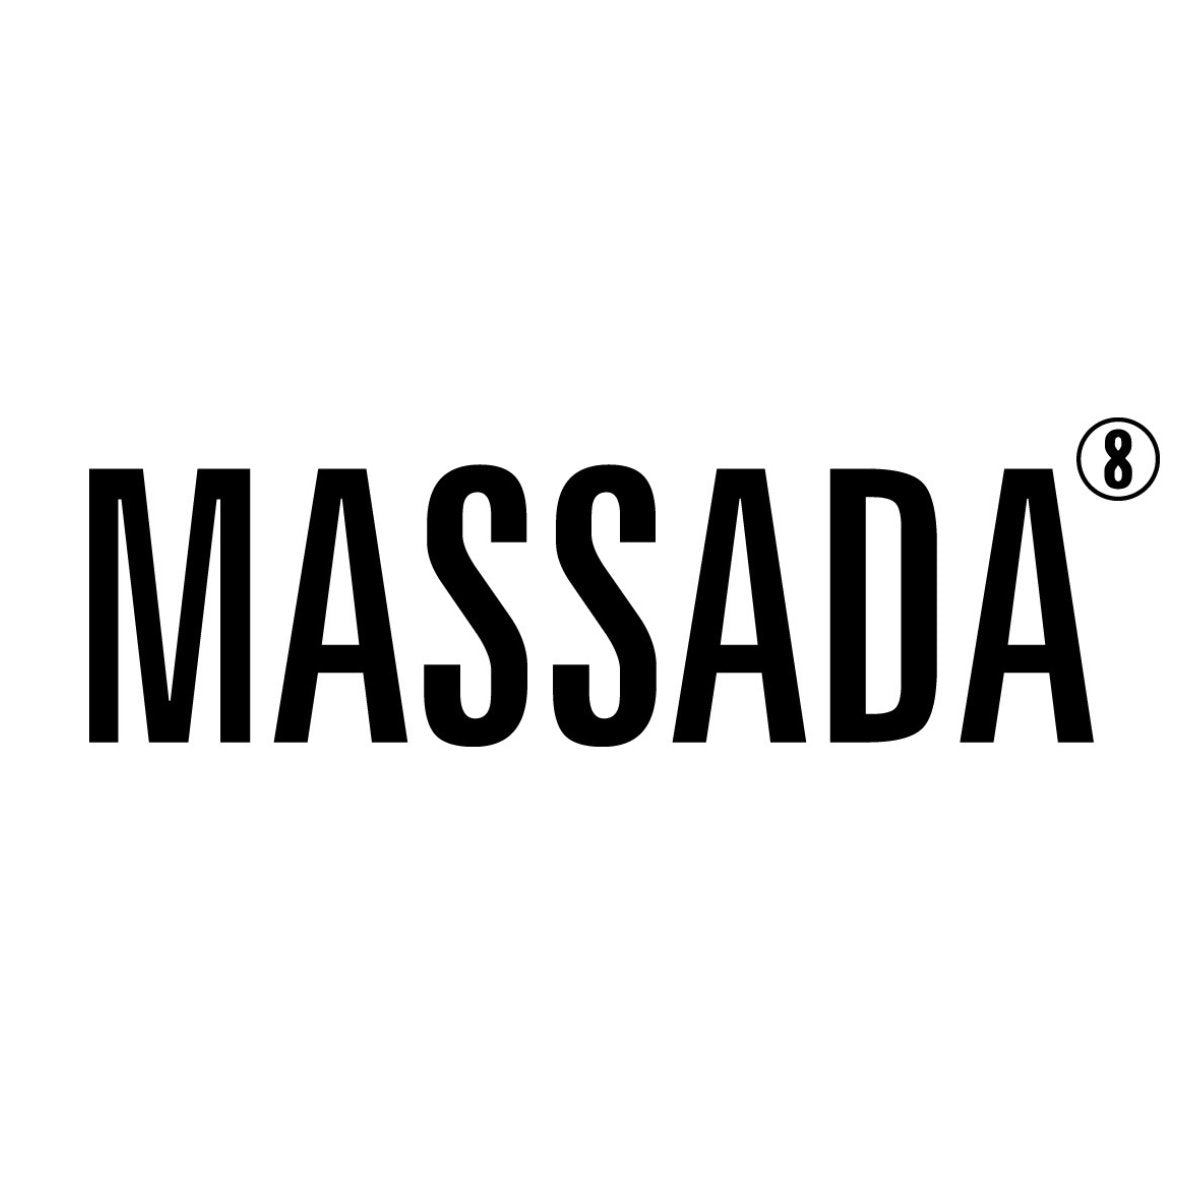 "Massada Eyewear: Stylish and Functional Optical and Sunglasses for Men and Women with Free Shipping"